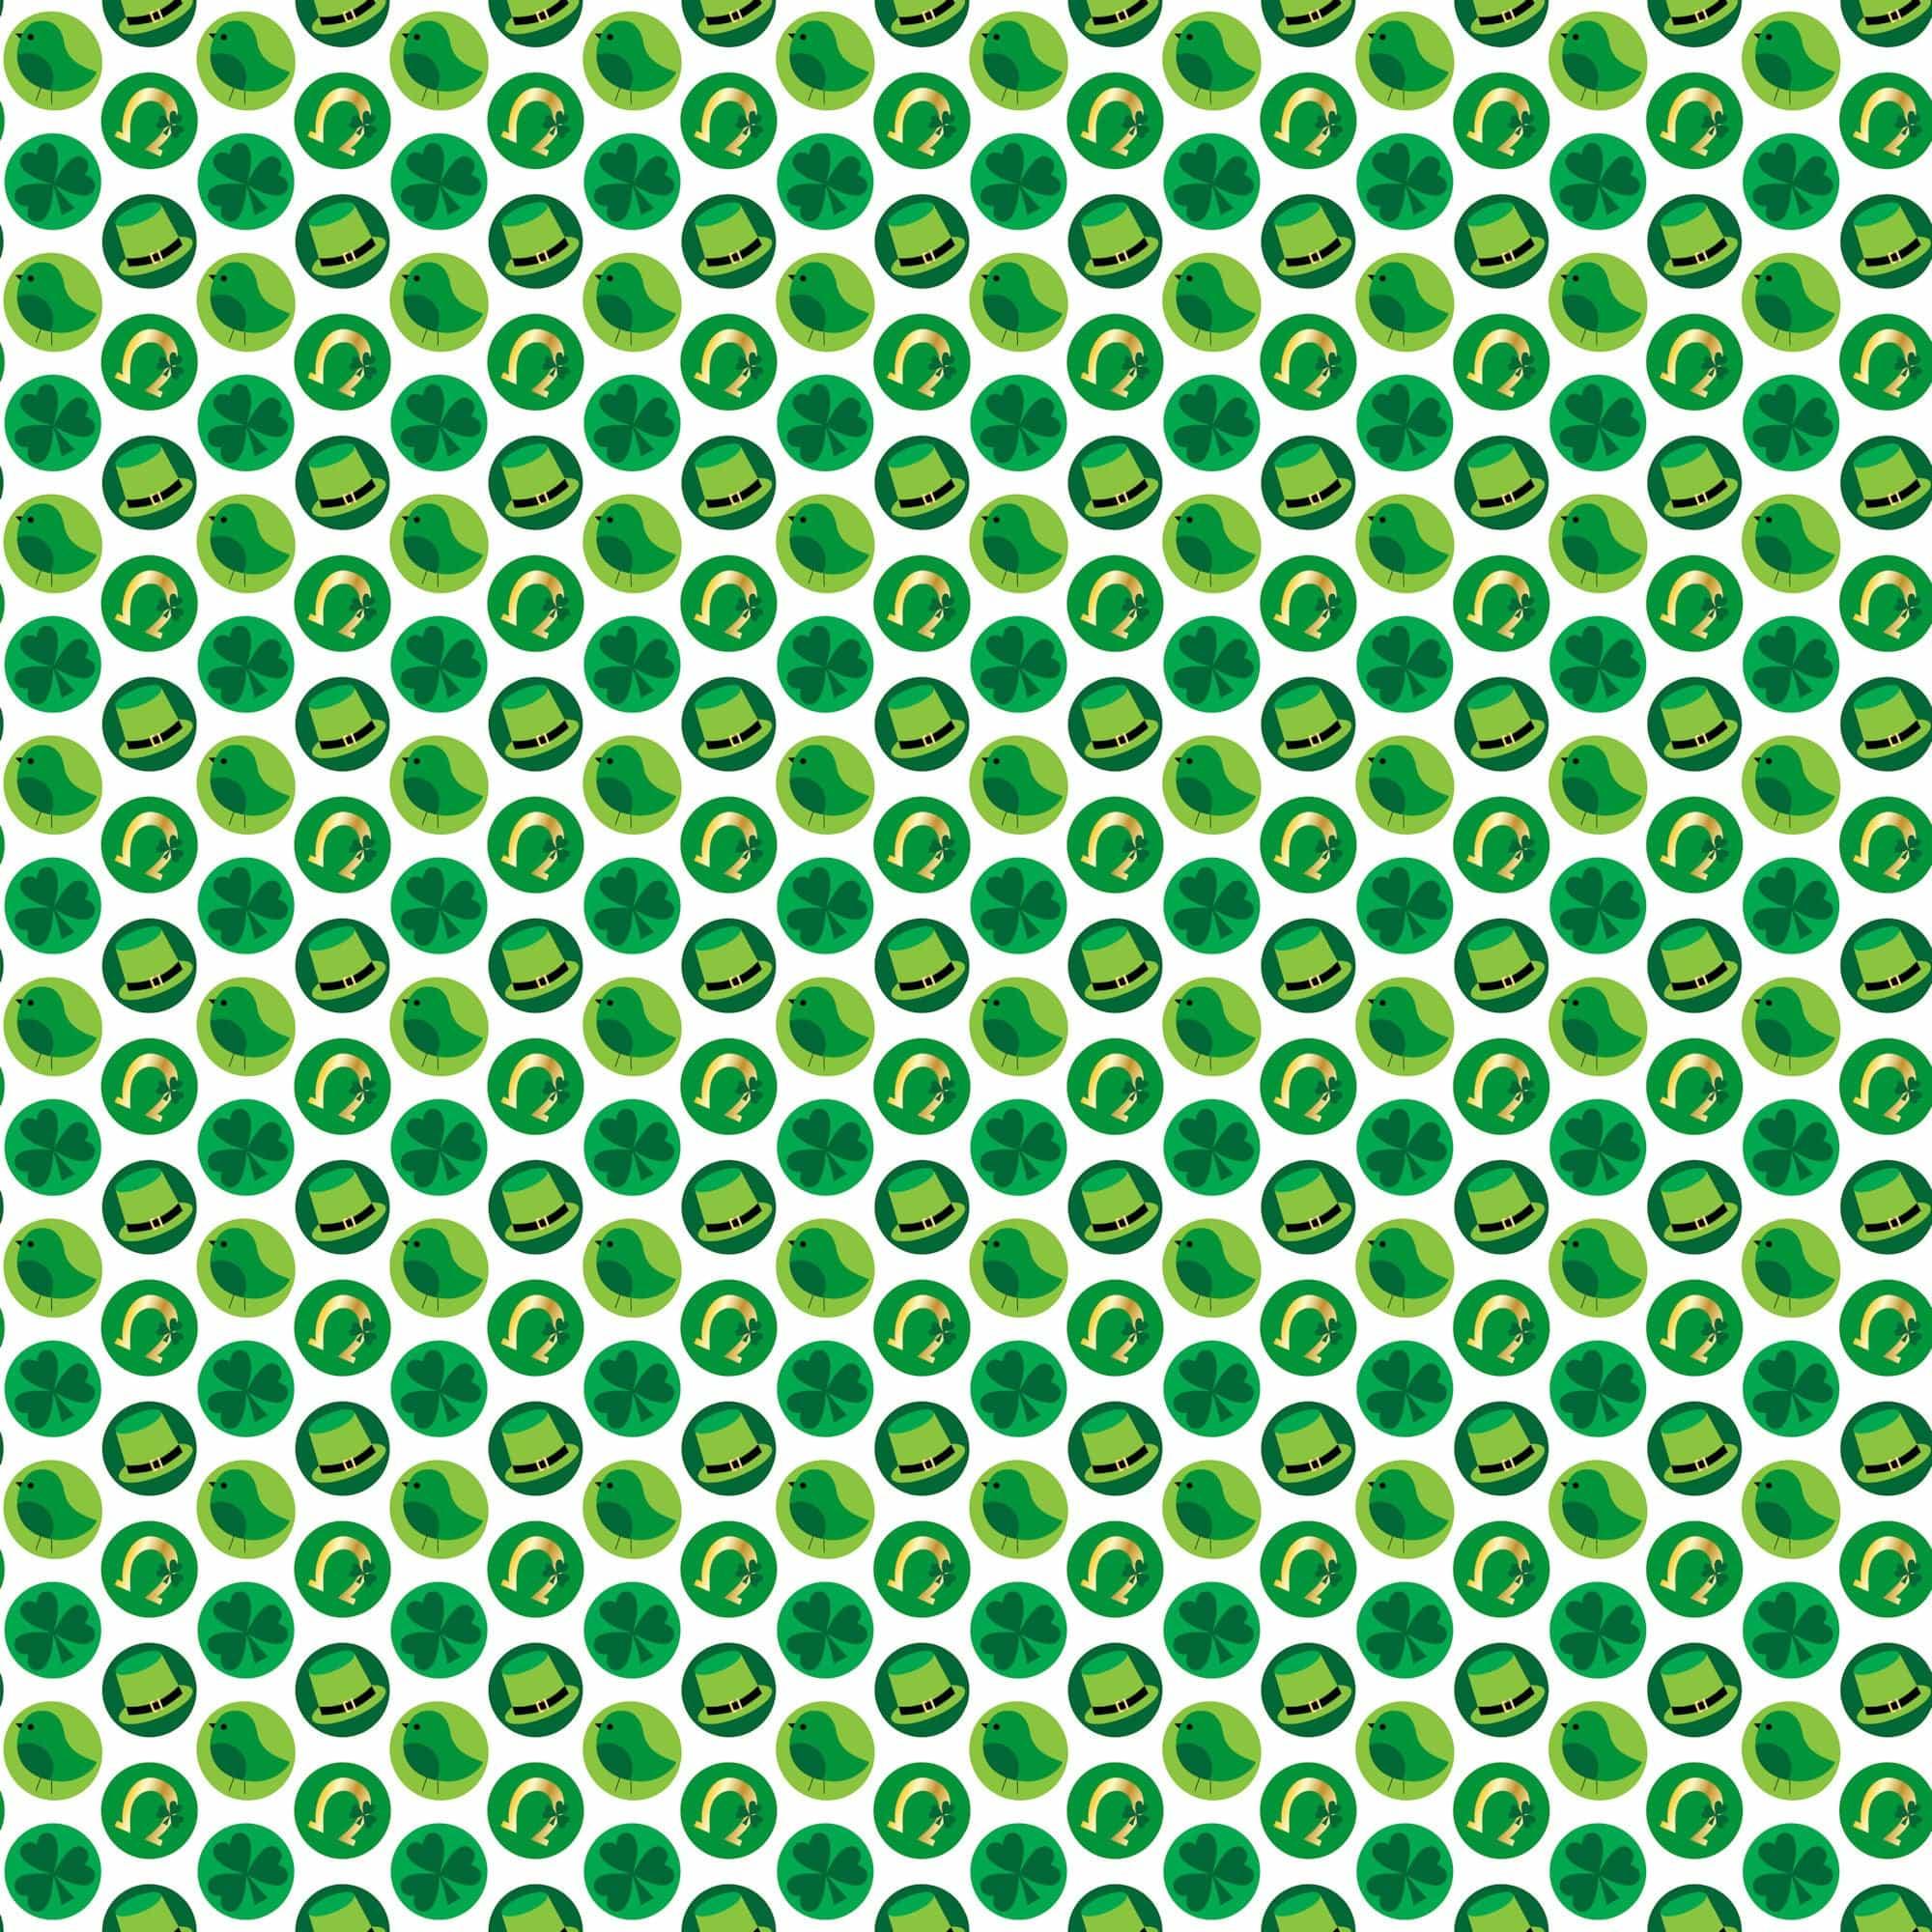 St. Pat's Traditional Collection Happy St. Patrick's Day 12 x 12 Double-Sided Scrapbook Paper by SSC Designs - Scrapbook Supply Companies